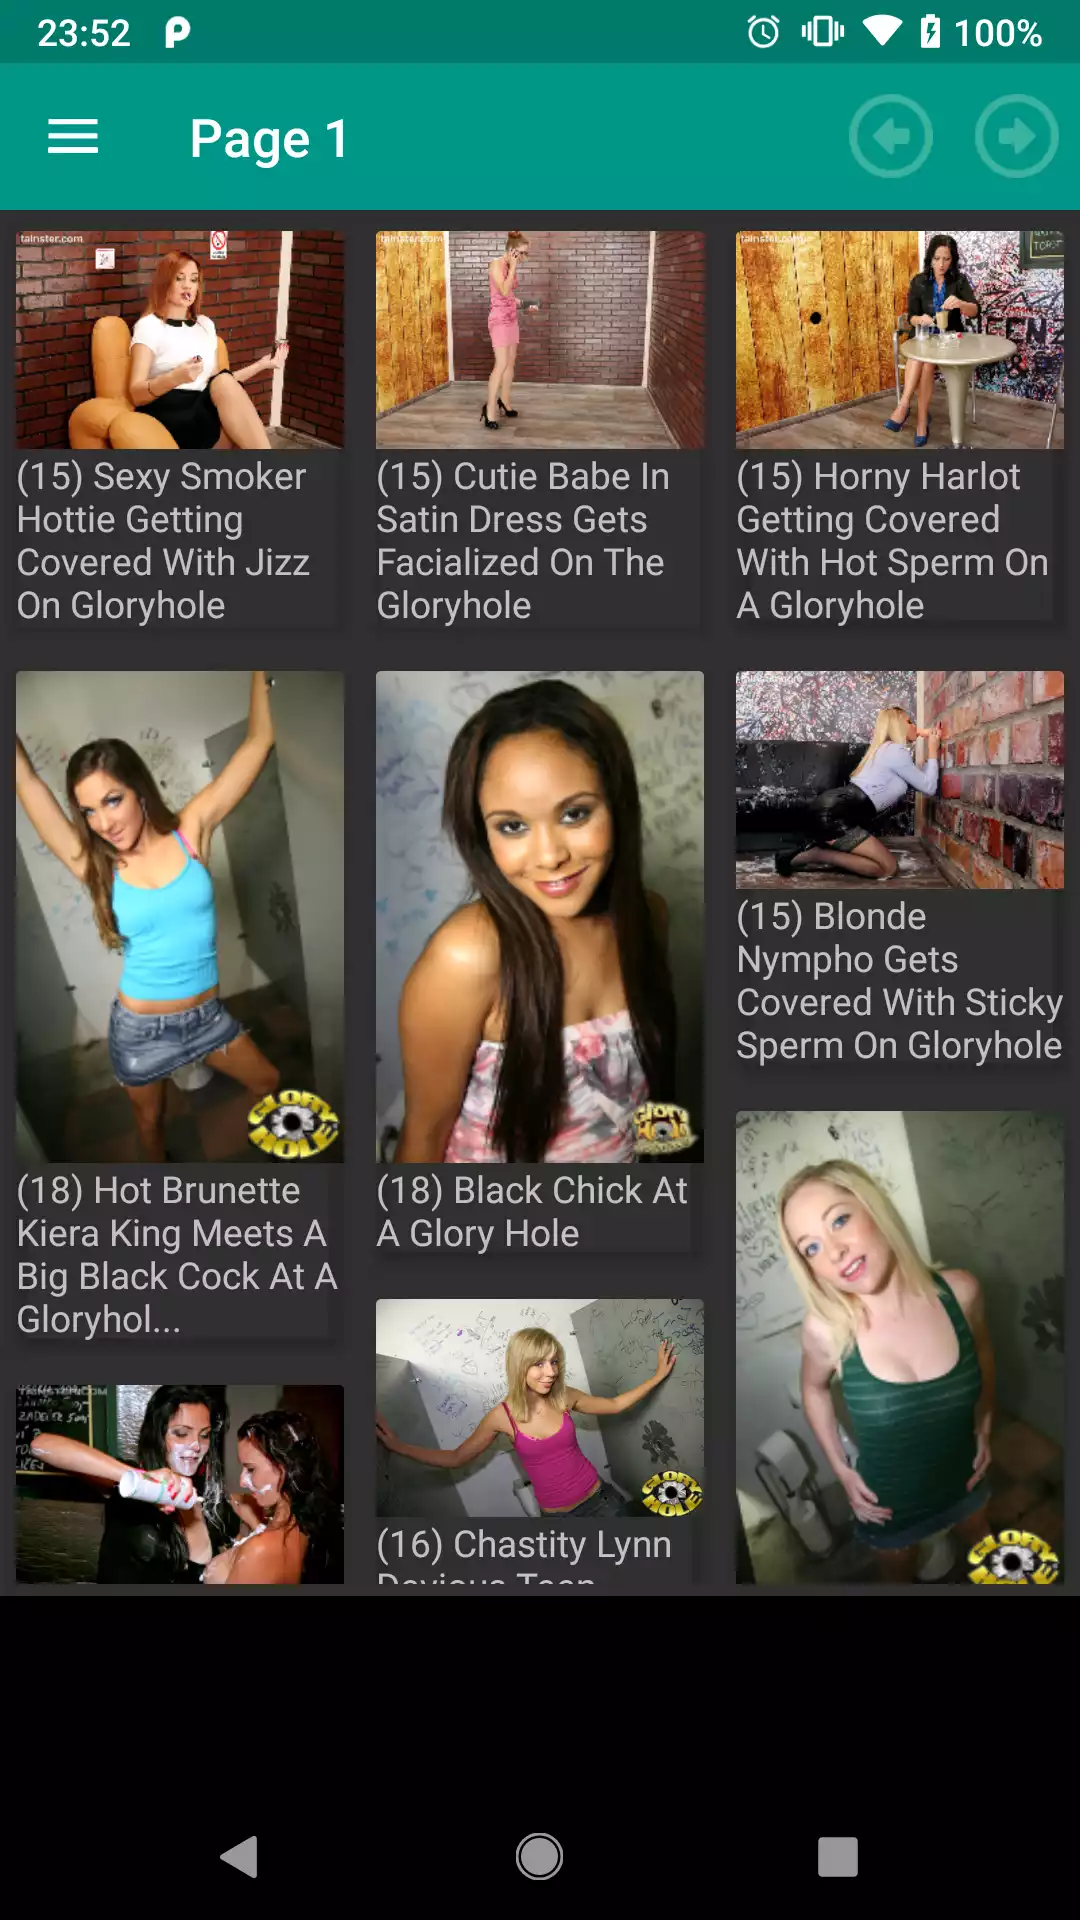 Gloryhole galleries picture,lisa,amateur,hintai,app,suck,gloryhole,henti,hentia,and,gallery,adult,pornstars,panties,apps,mod,porn,galleries,hentai,xxx,pics,images,puzzles,dick,apk